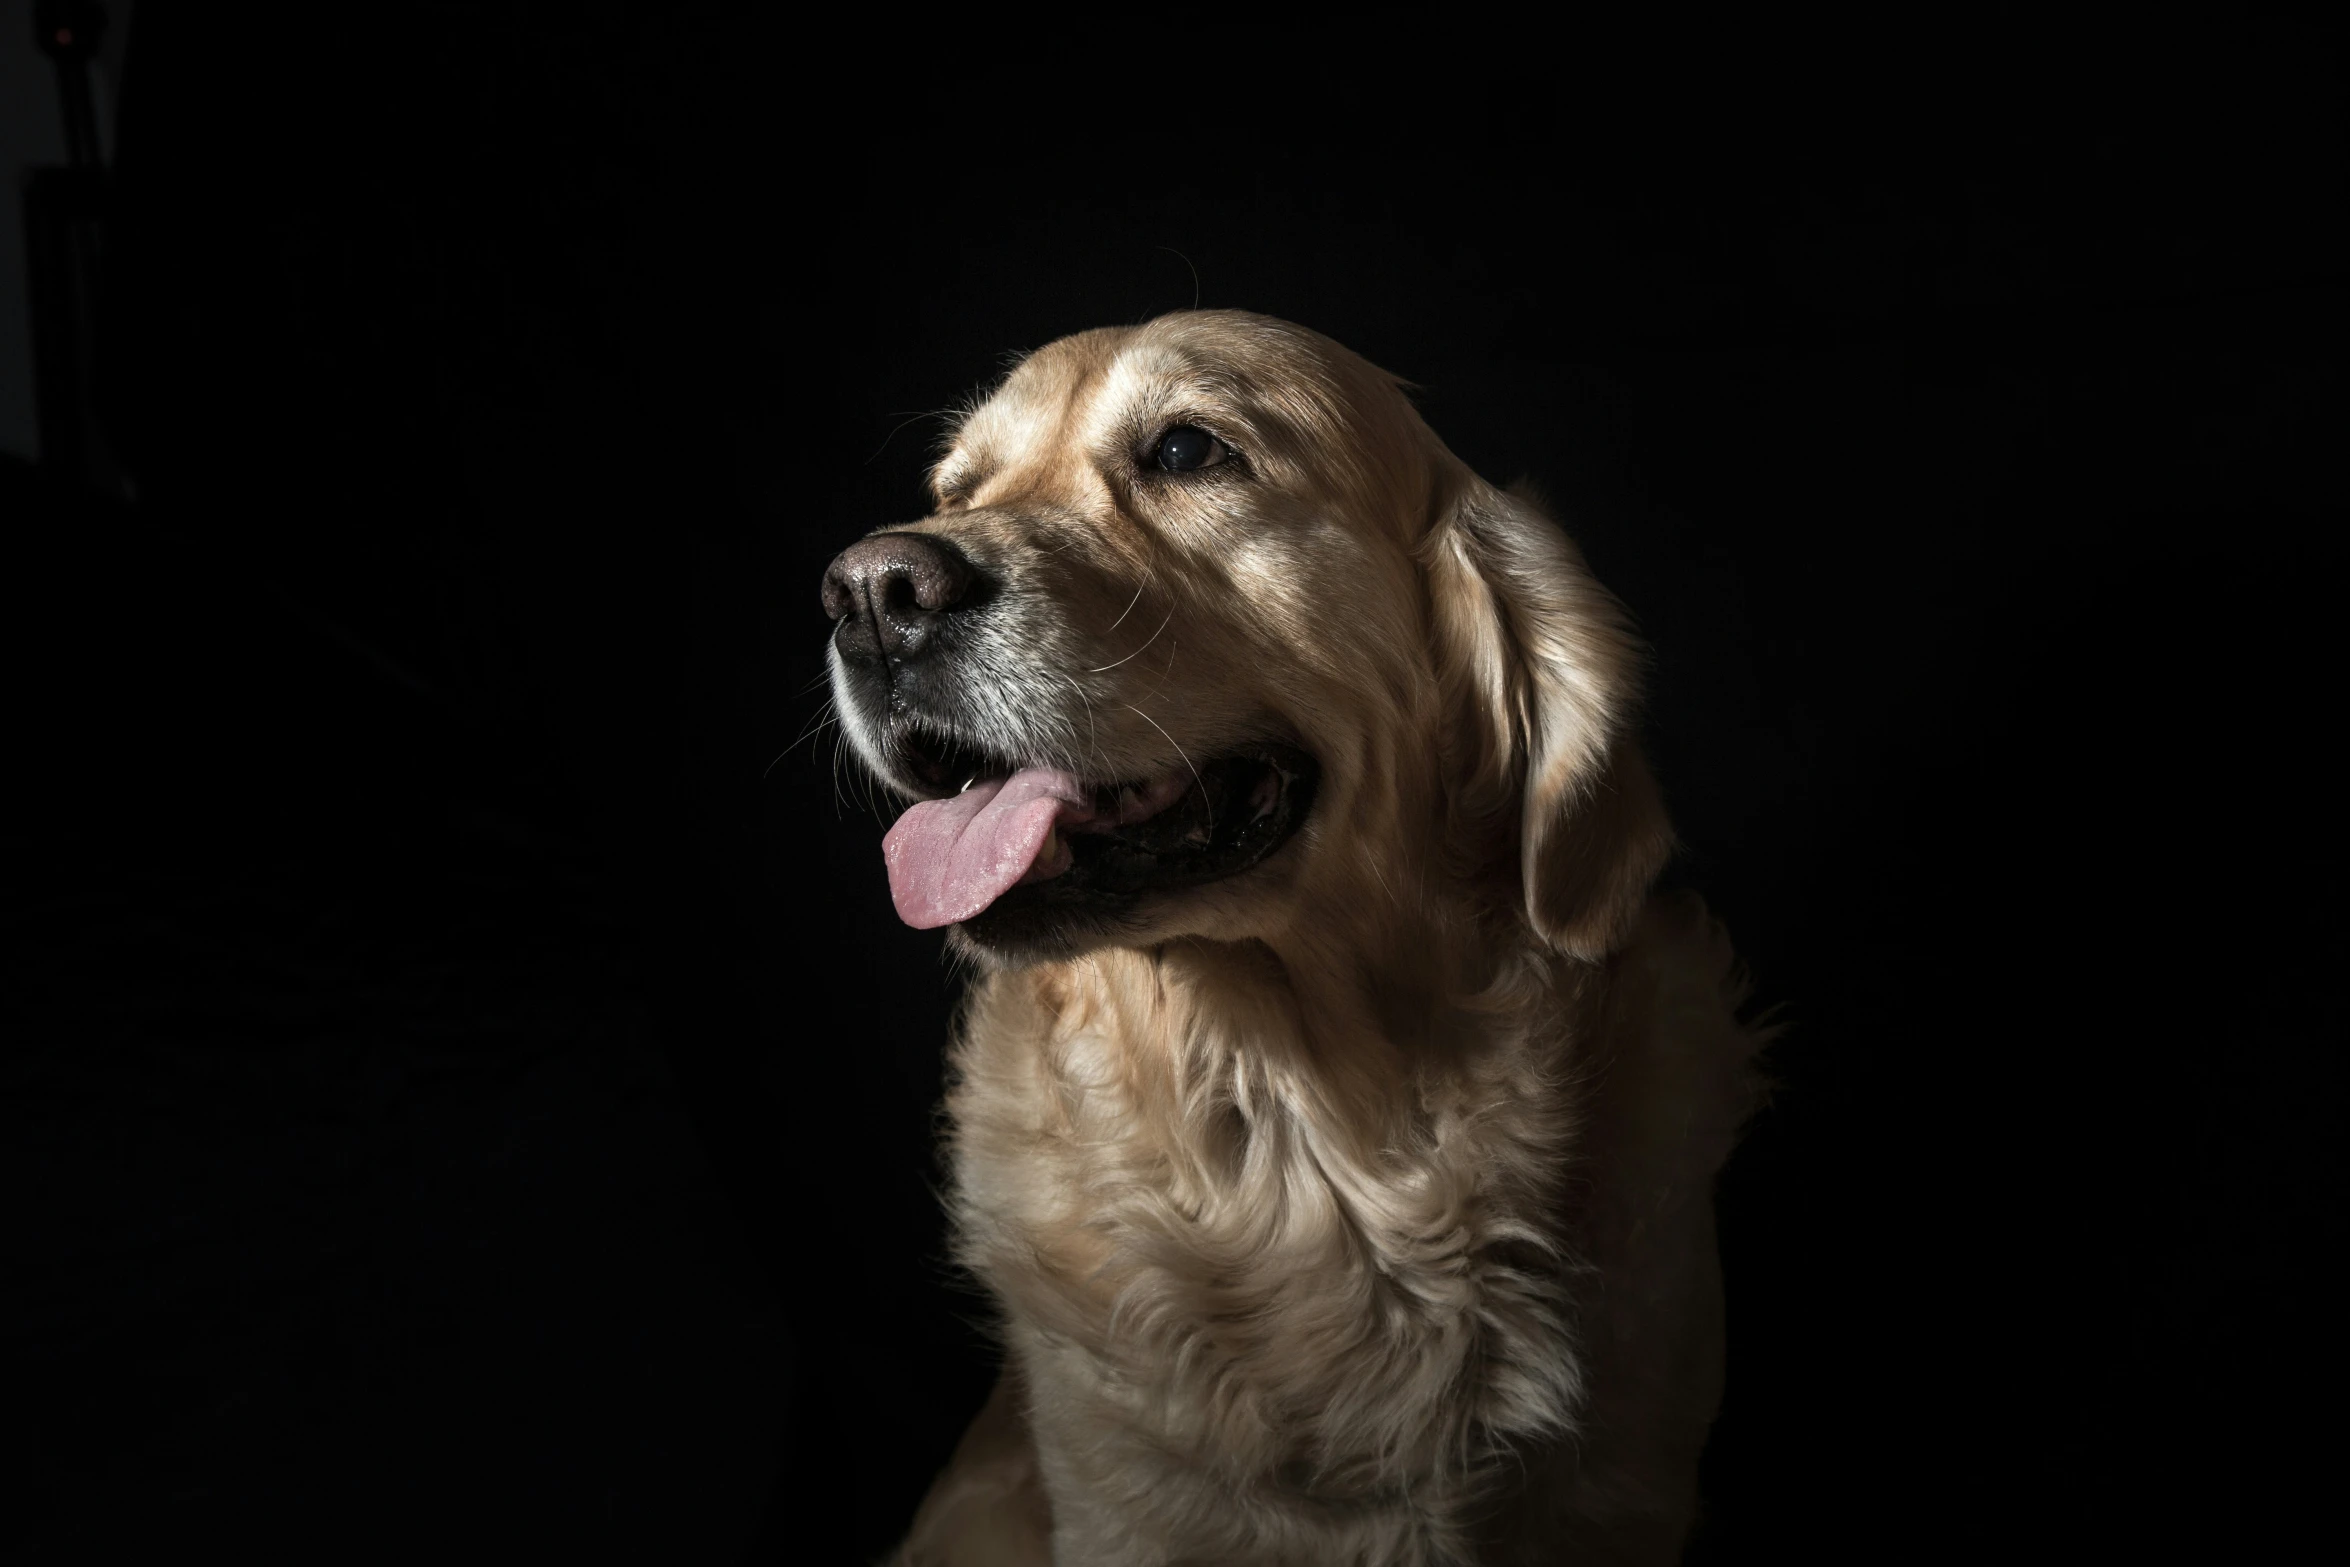 a close up of a dog panting on a dark background